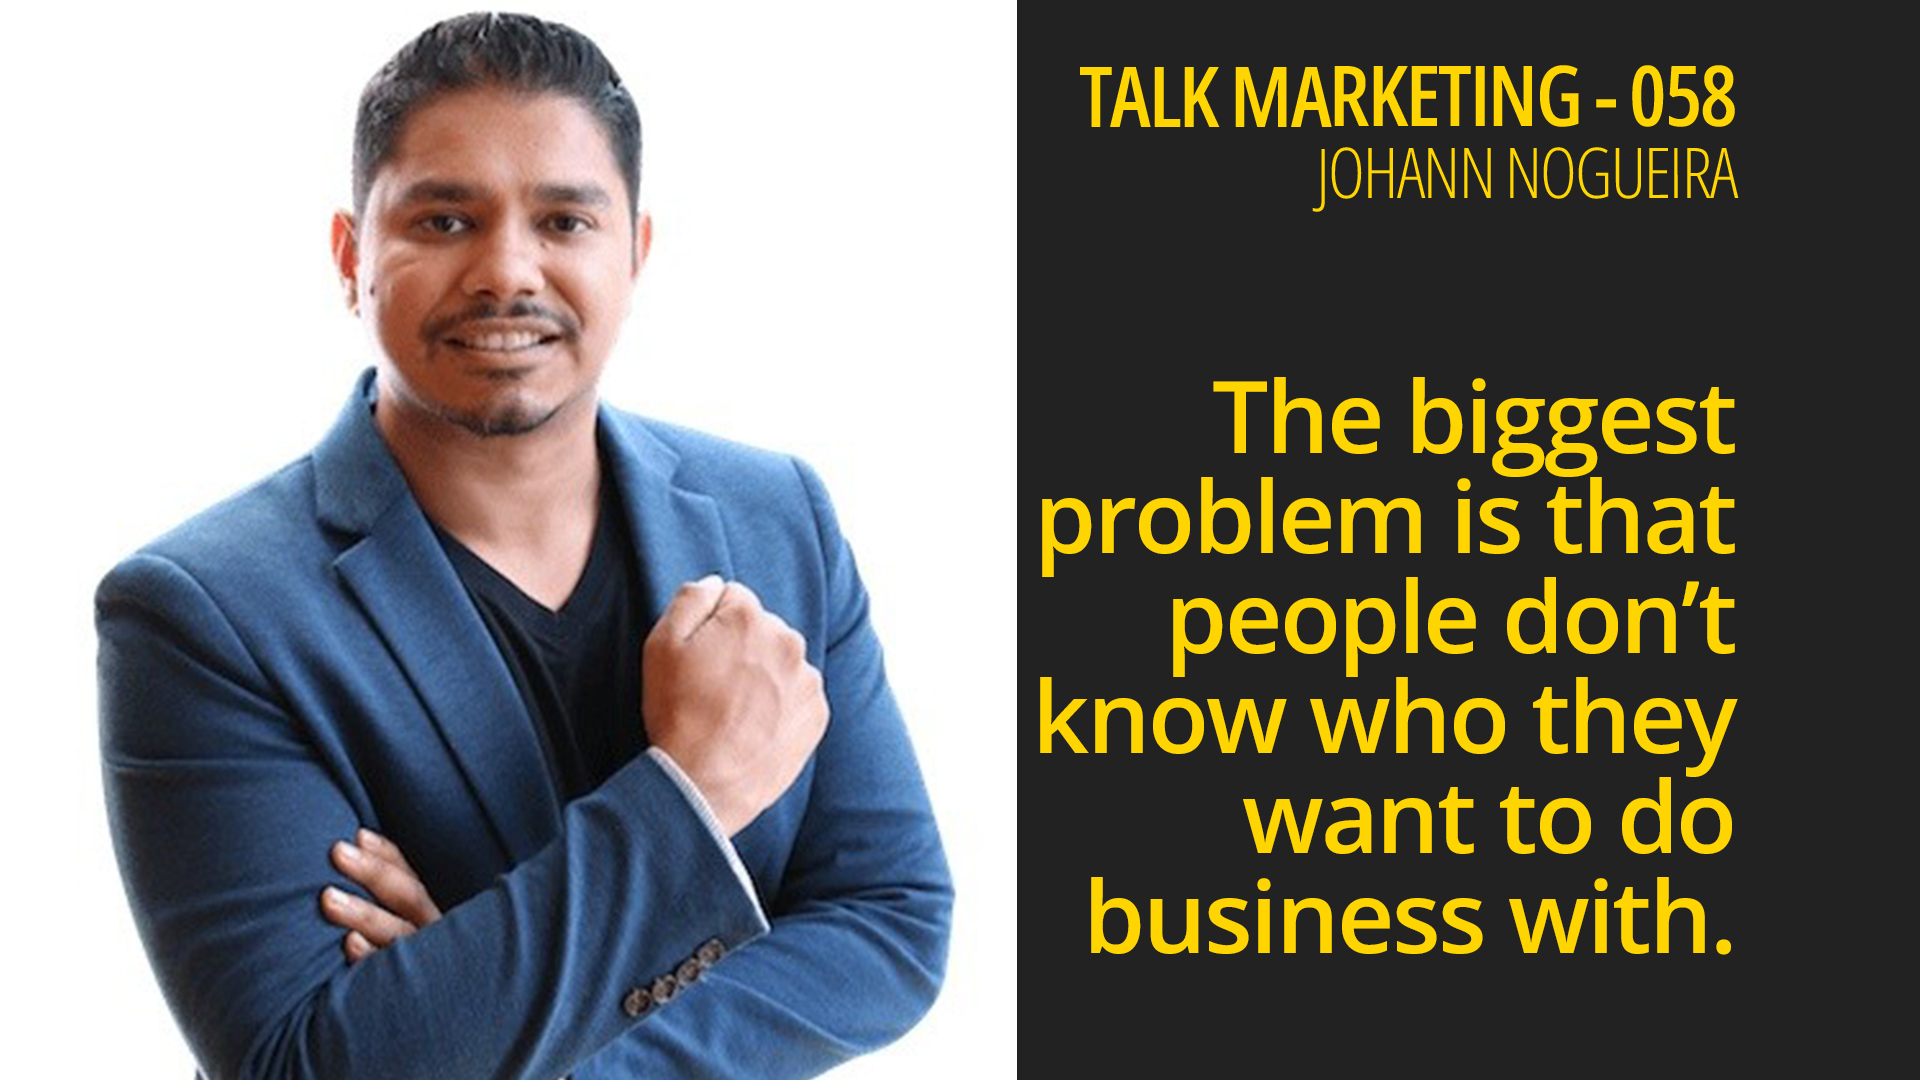 People don’t know who they want to do business with – Talk Marketing 058 – Johann Nogueira